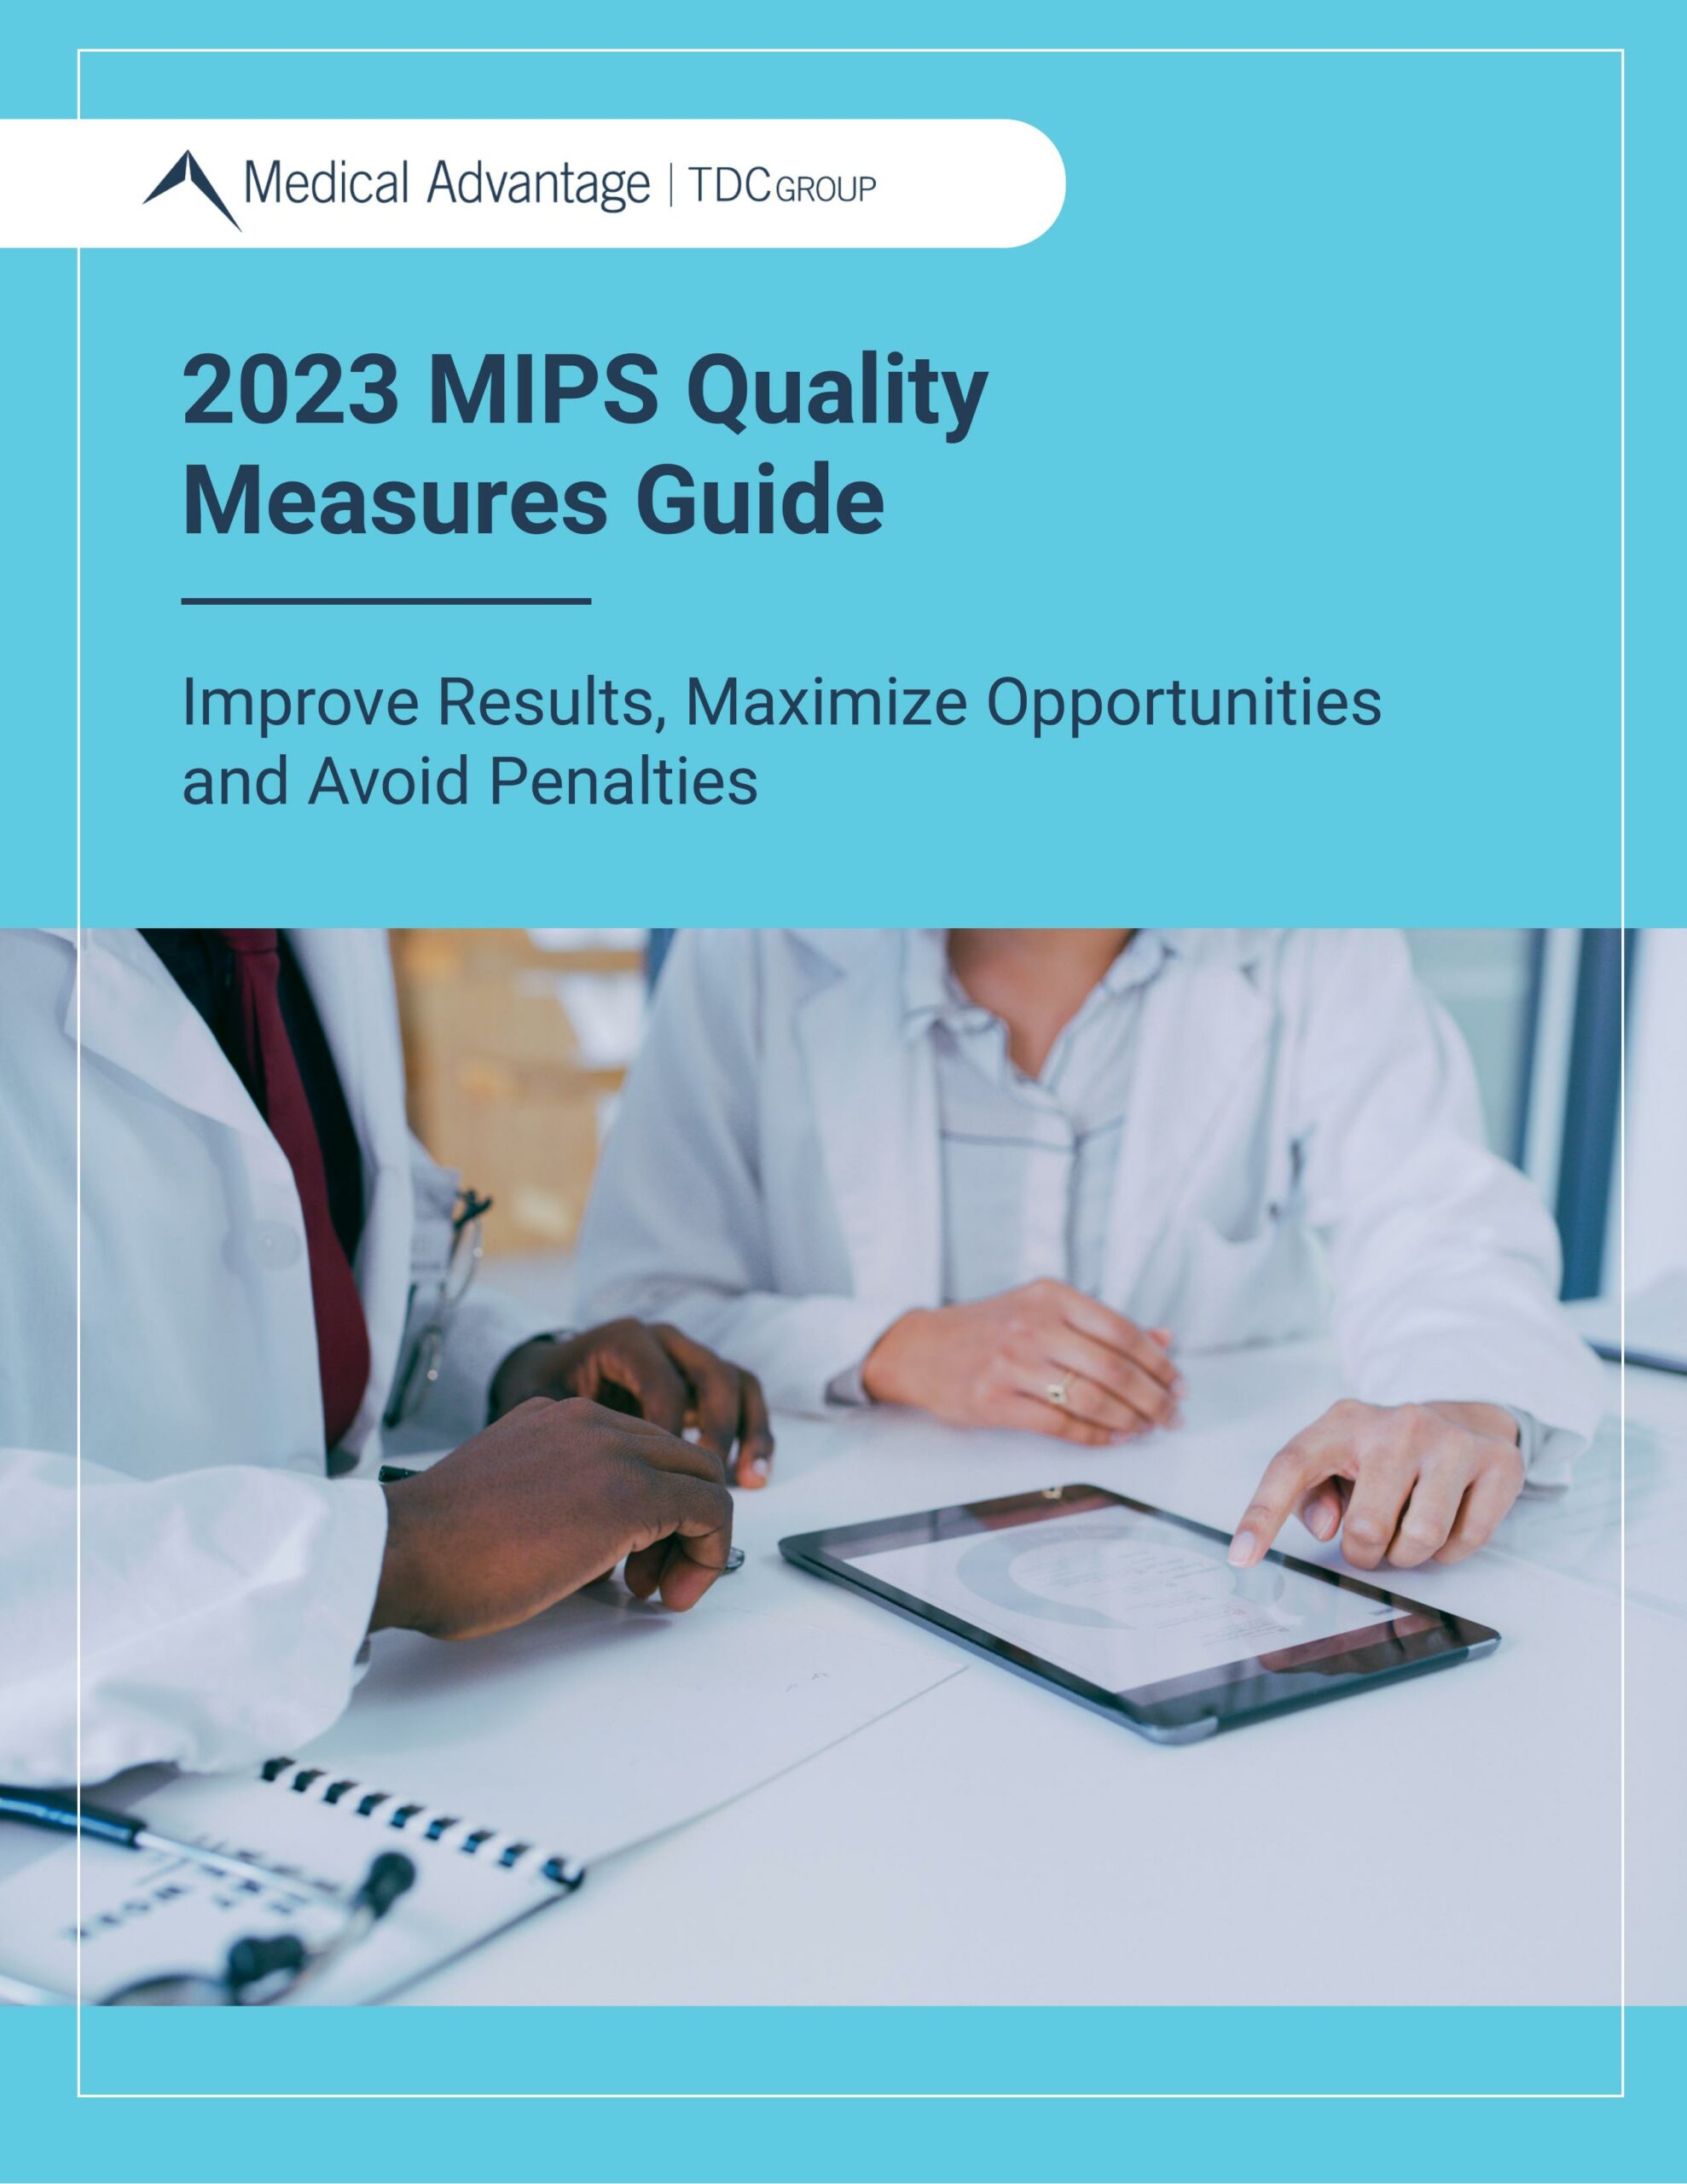 MIPS Quality Measures Guide ebook